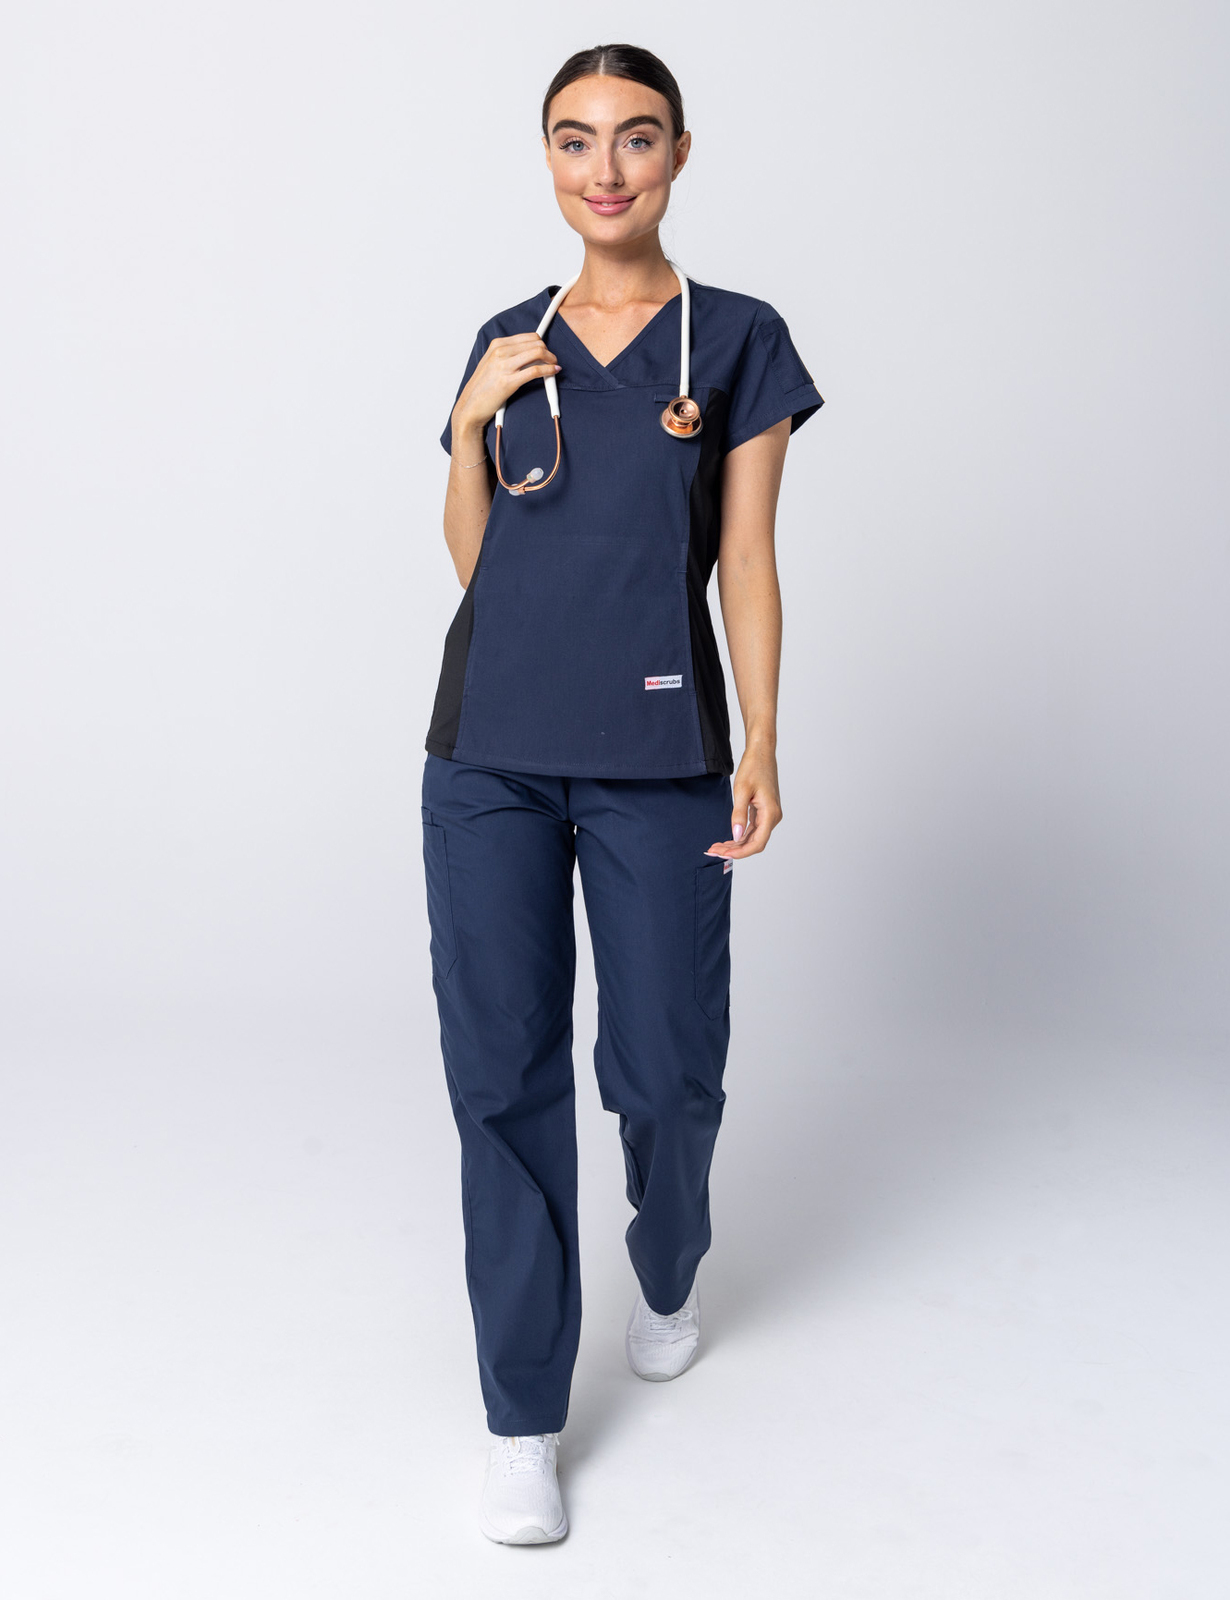 Women's Fit Solid Scrub Top With Spandex Panel - Navy - Large